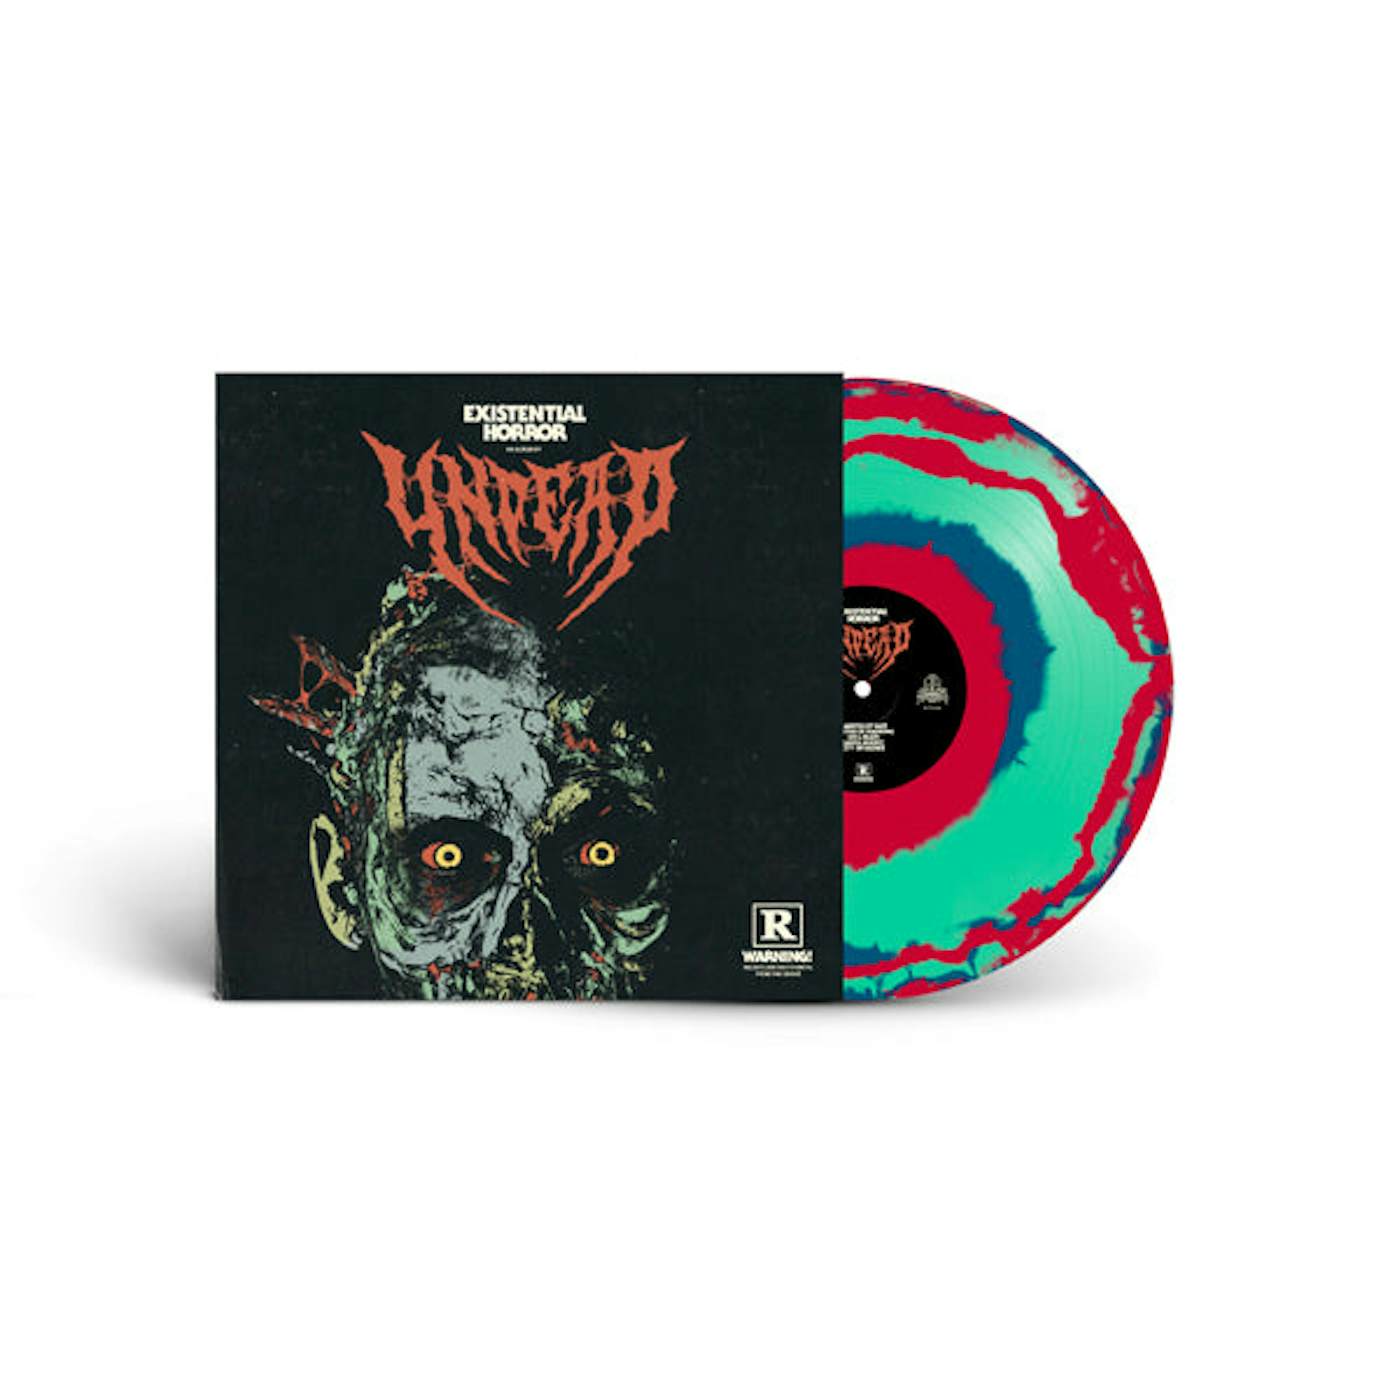 Undead LP - Existential Horror (Red/Blue/Teal Swirl Vinyl)